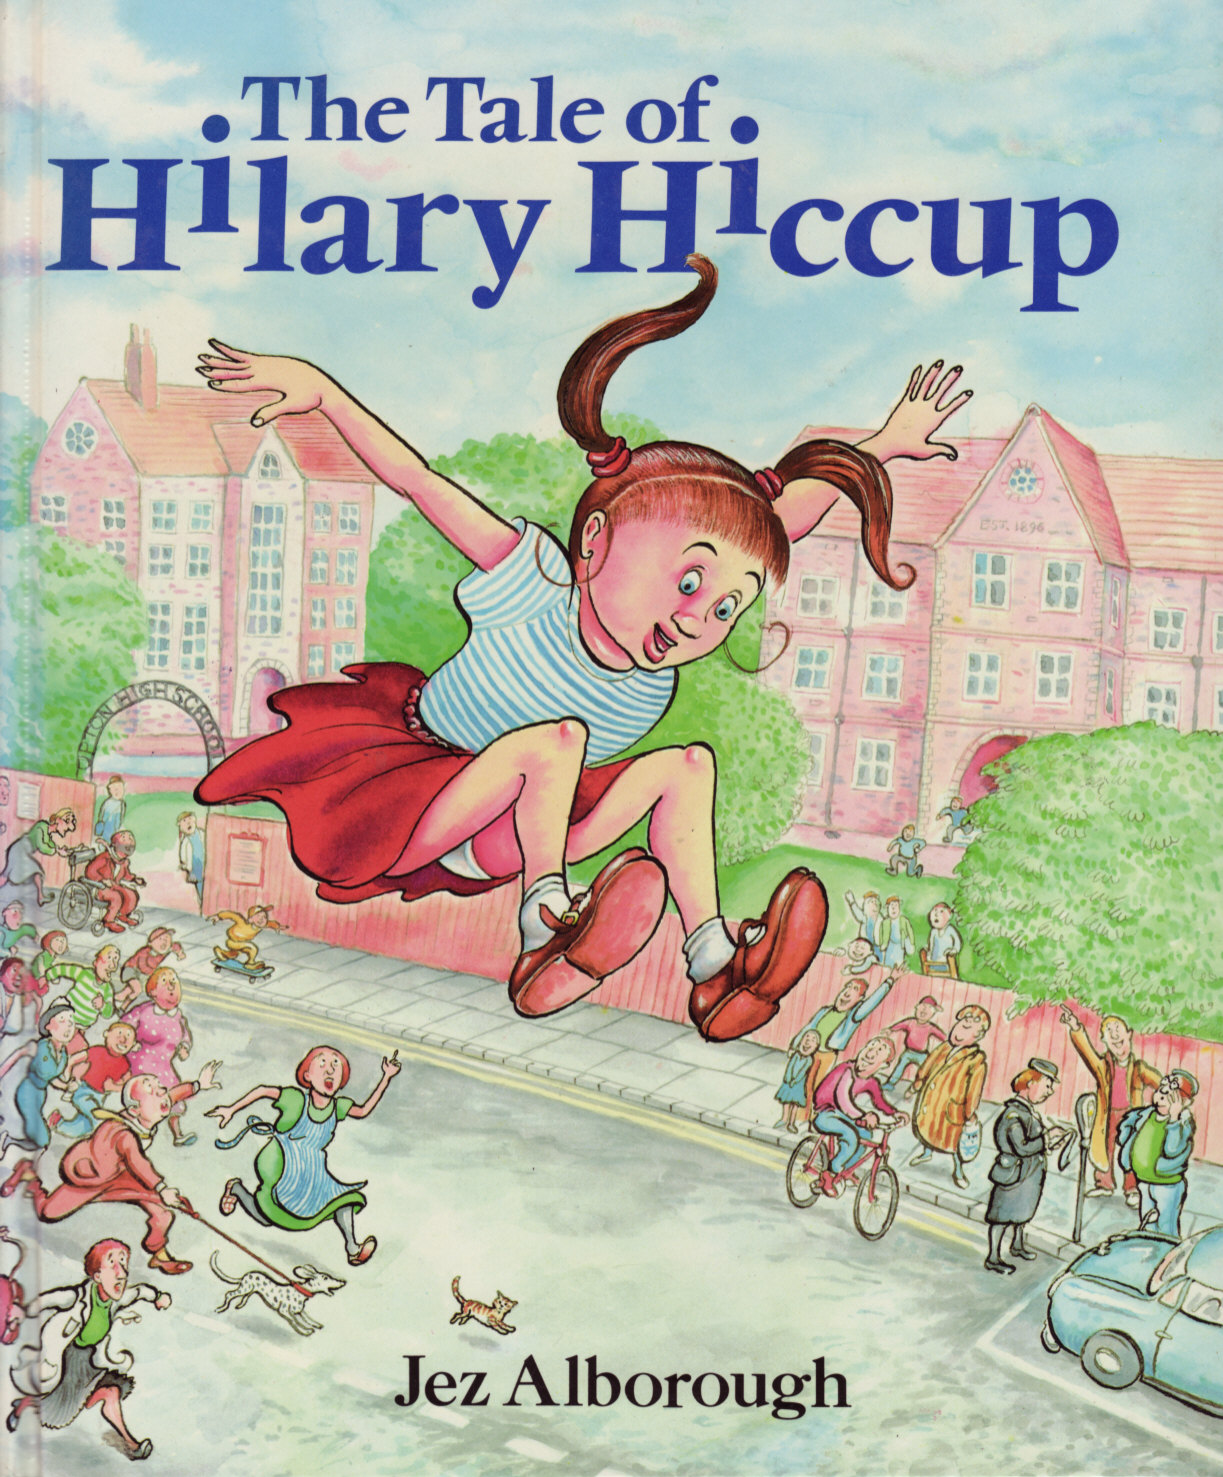 Hillary Hiccup